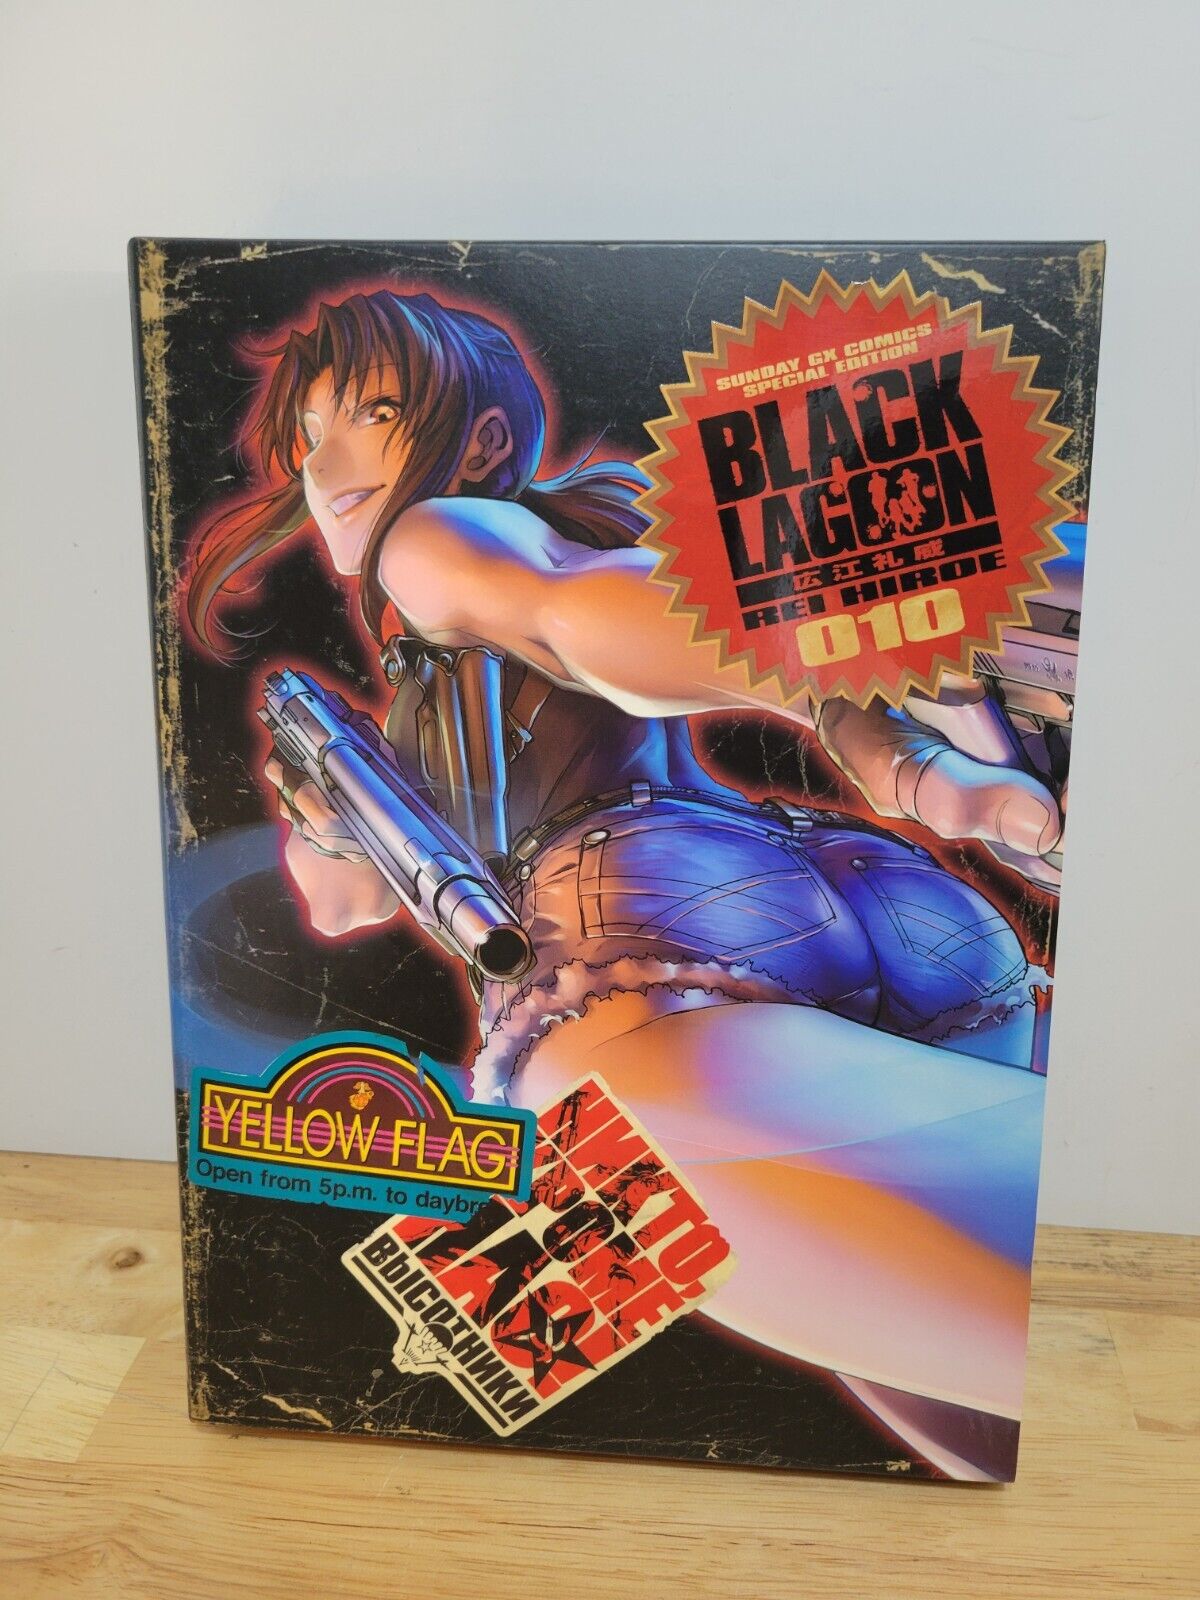 Black Lagoon Sunday GX Rei Hiroe Artworks Barrage and Call Mission 2 + poster